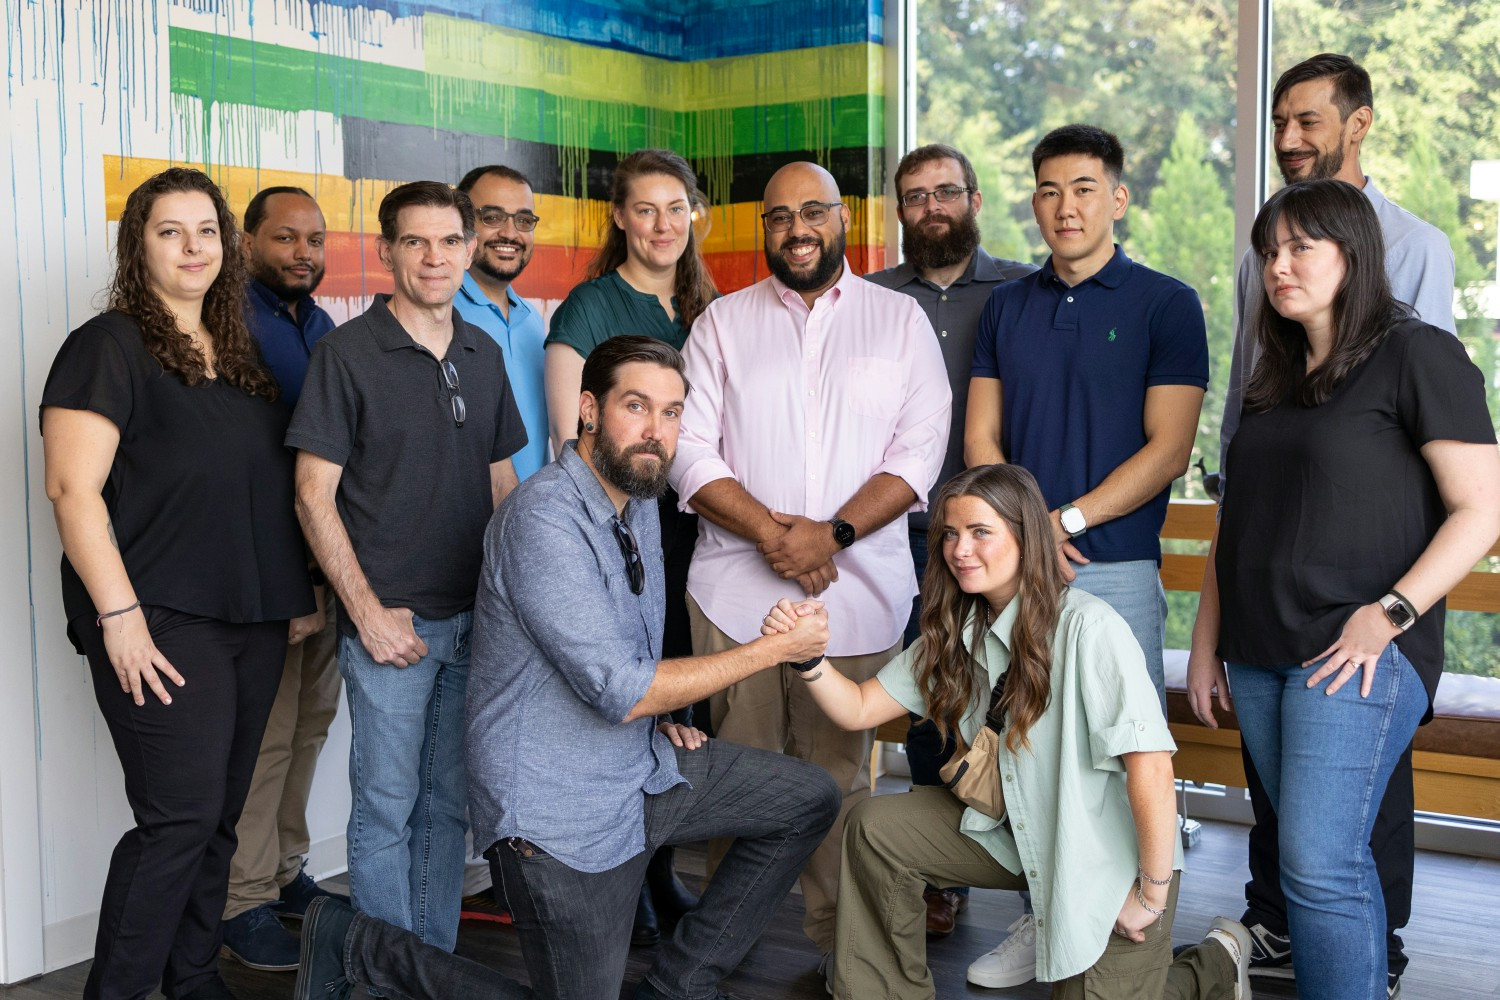 Kernel Camp is an immersive onboarding experience where new hires create lasting connections & learn our company values.